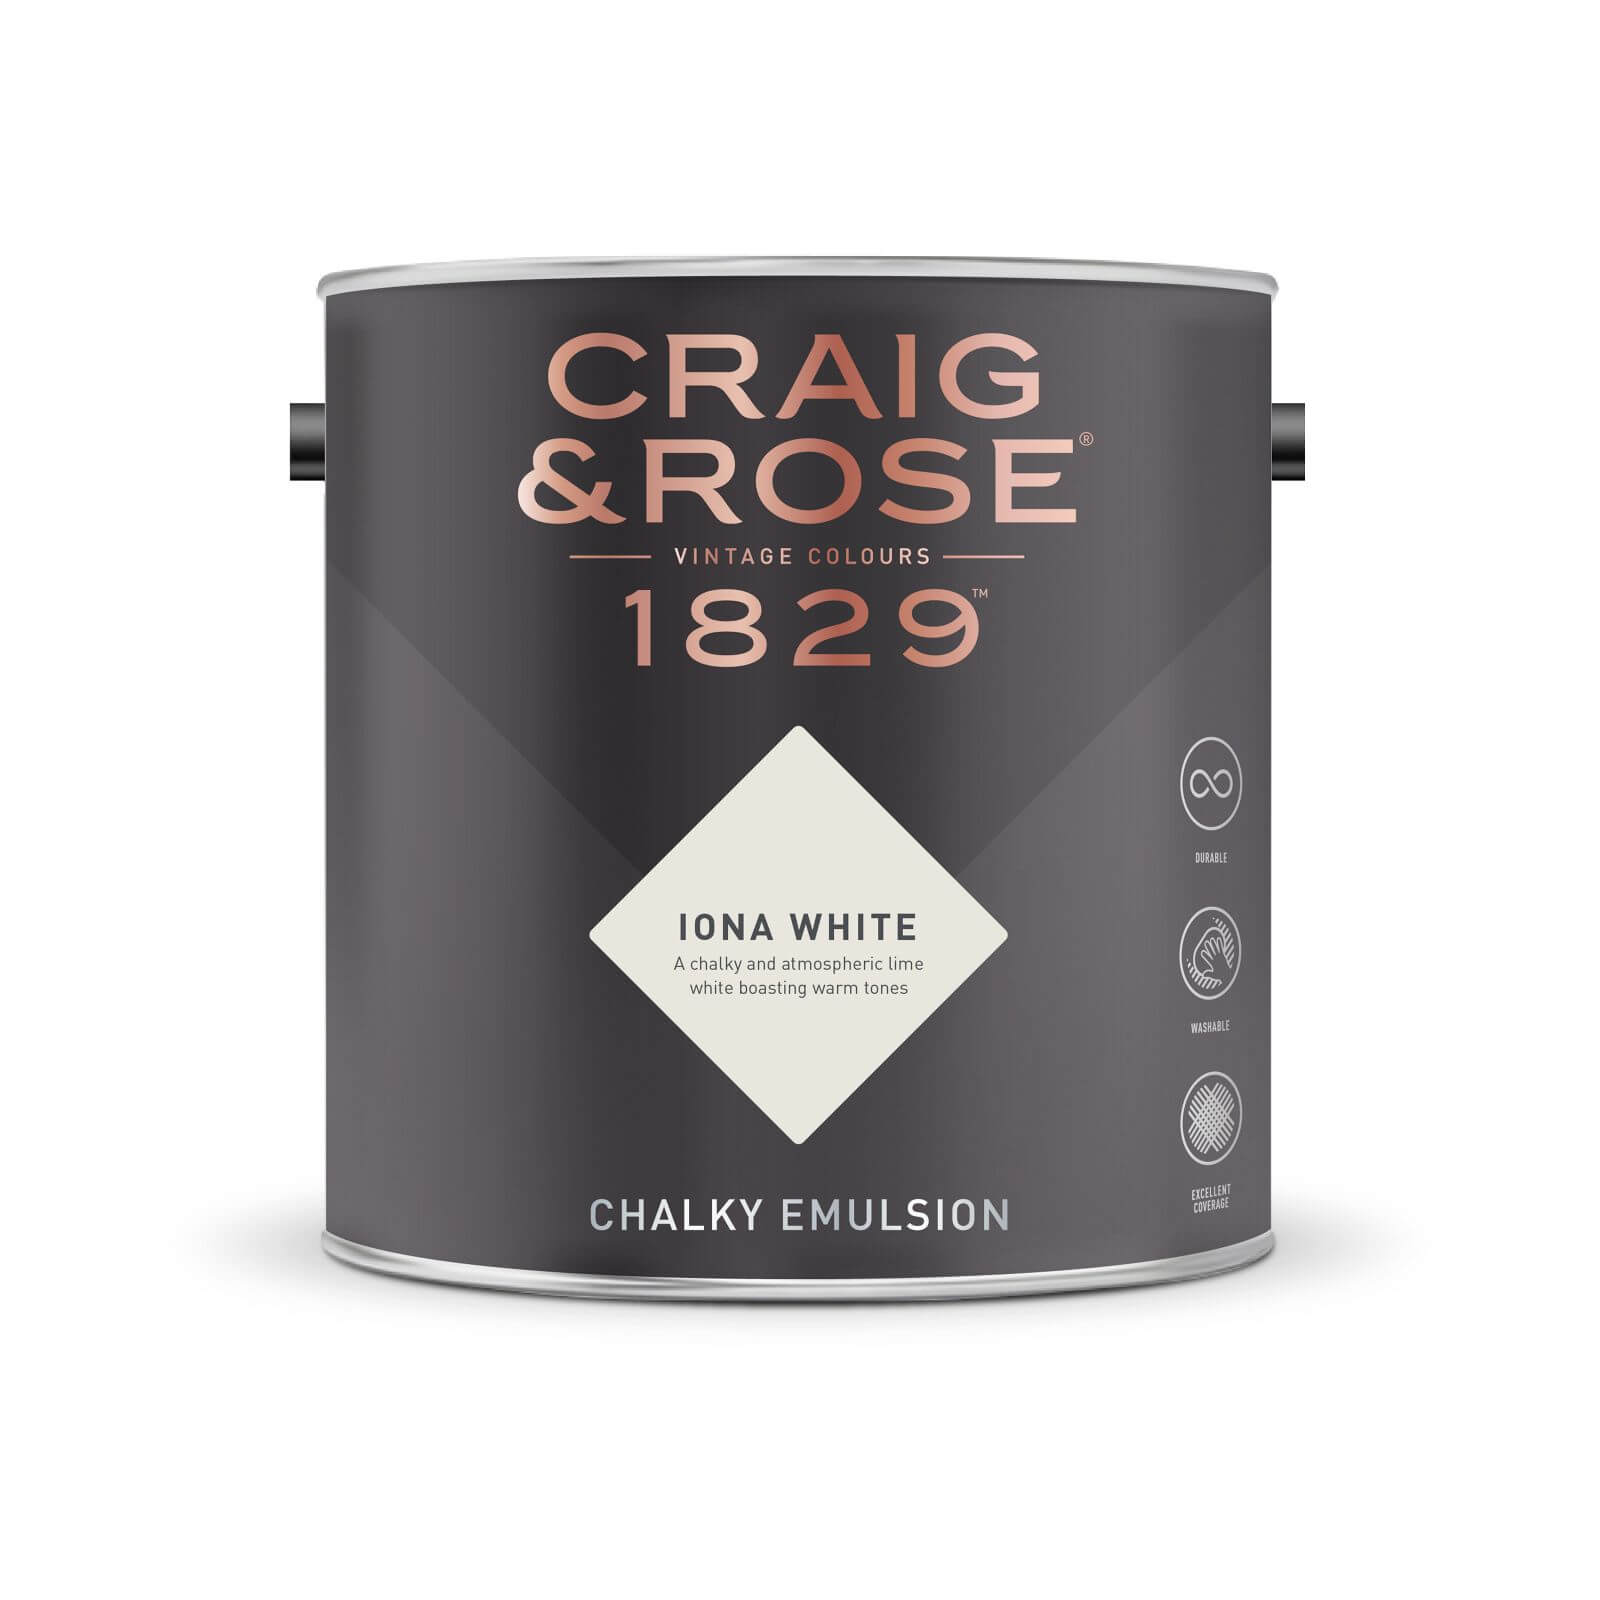 Craig & Rose 1829 Chalky Emulsion Paint Iona White - 2.5L